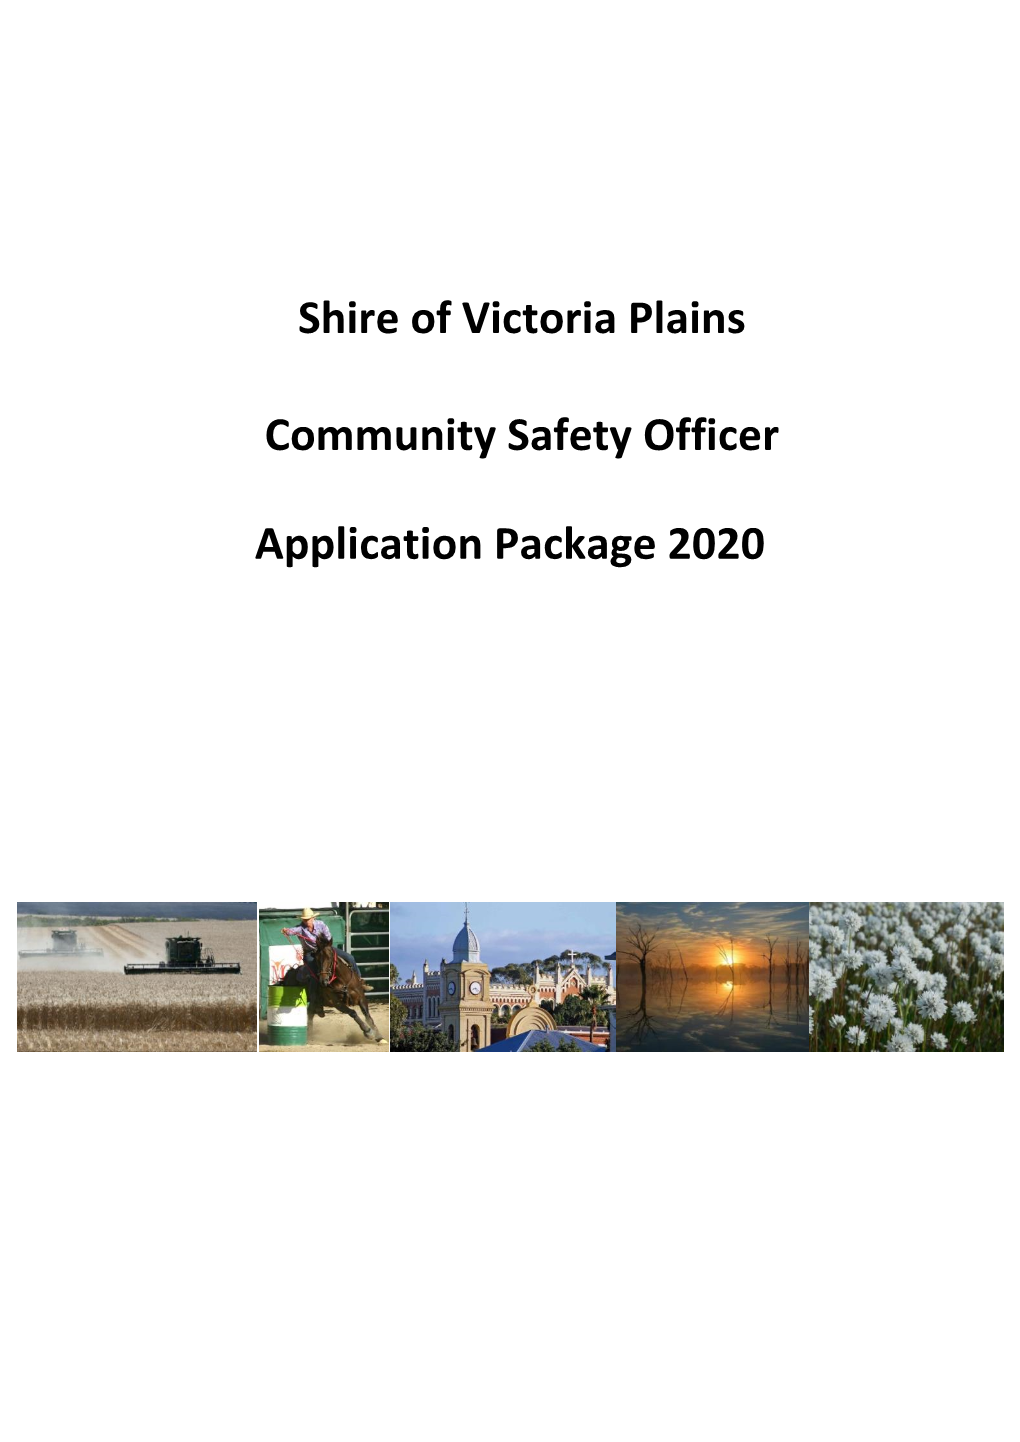 Shire of Victoria Plains Community Safety Officer Application Package